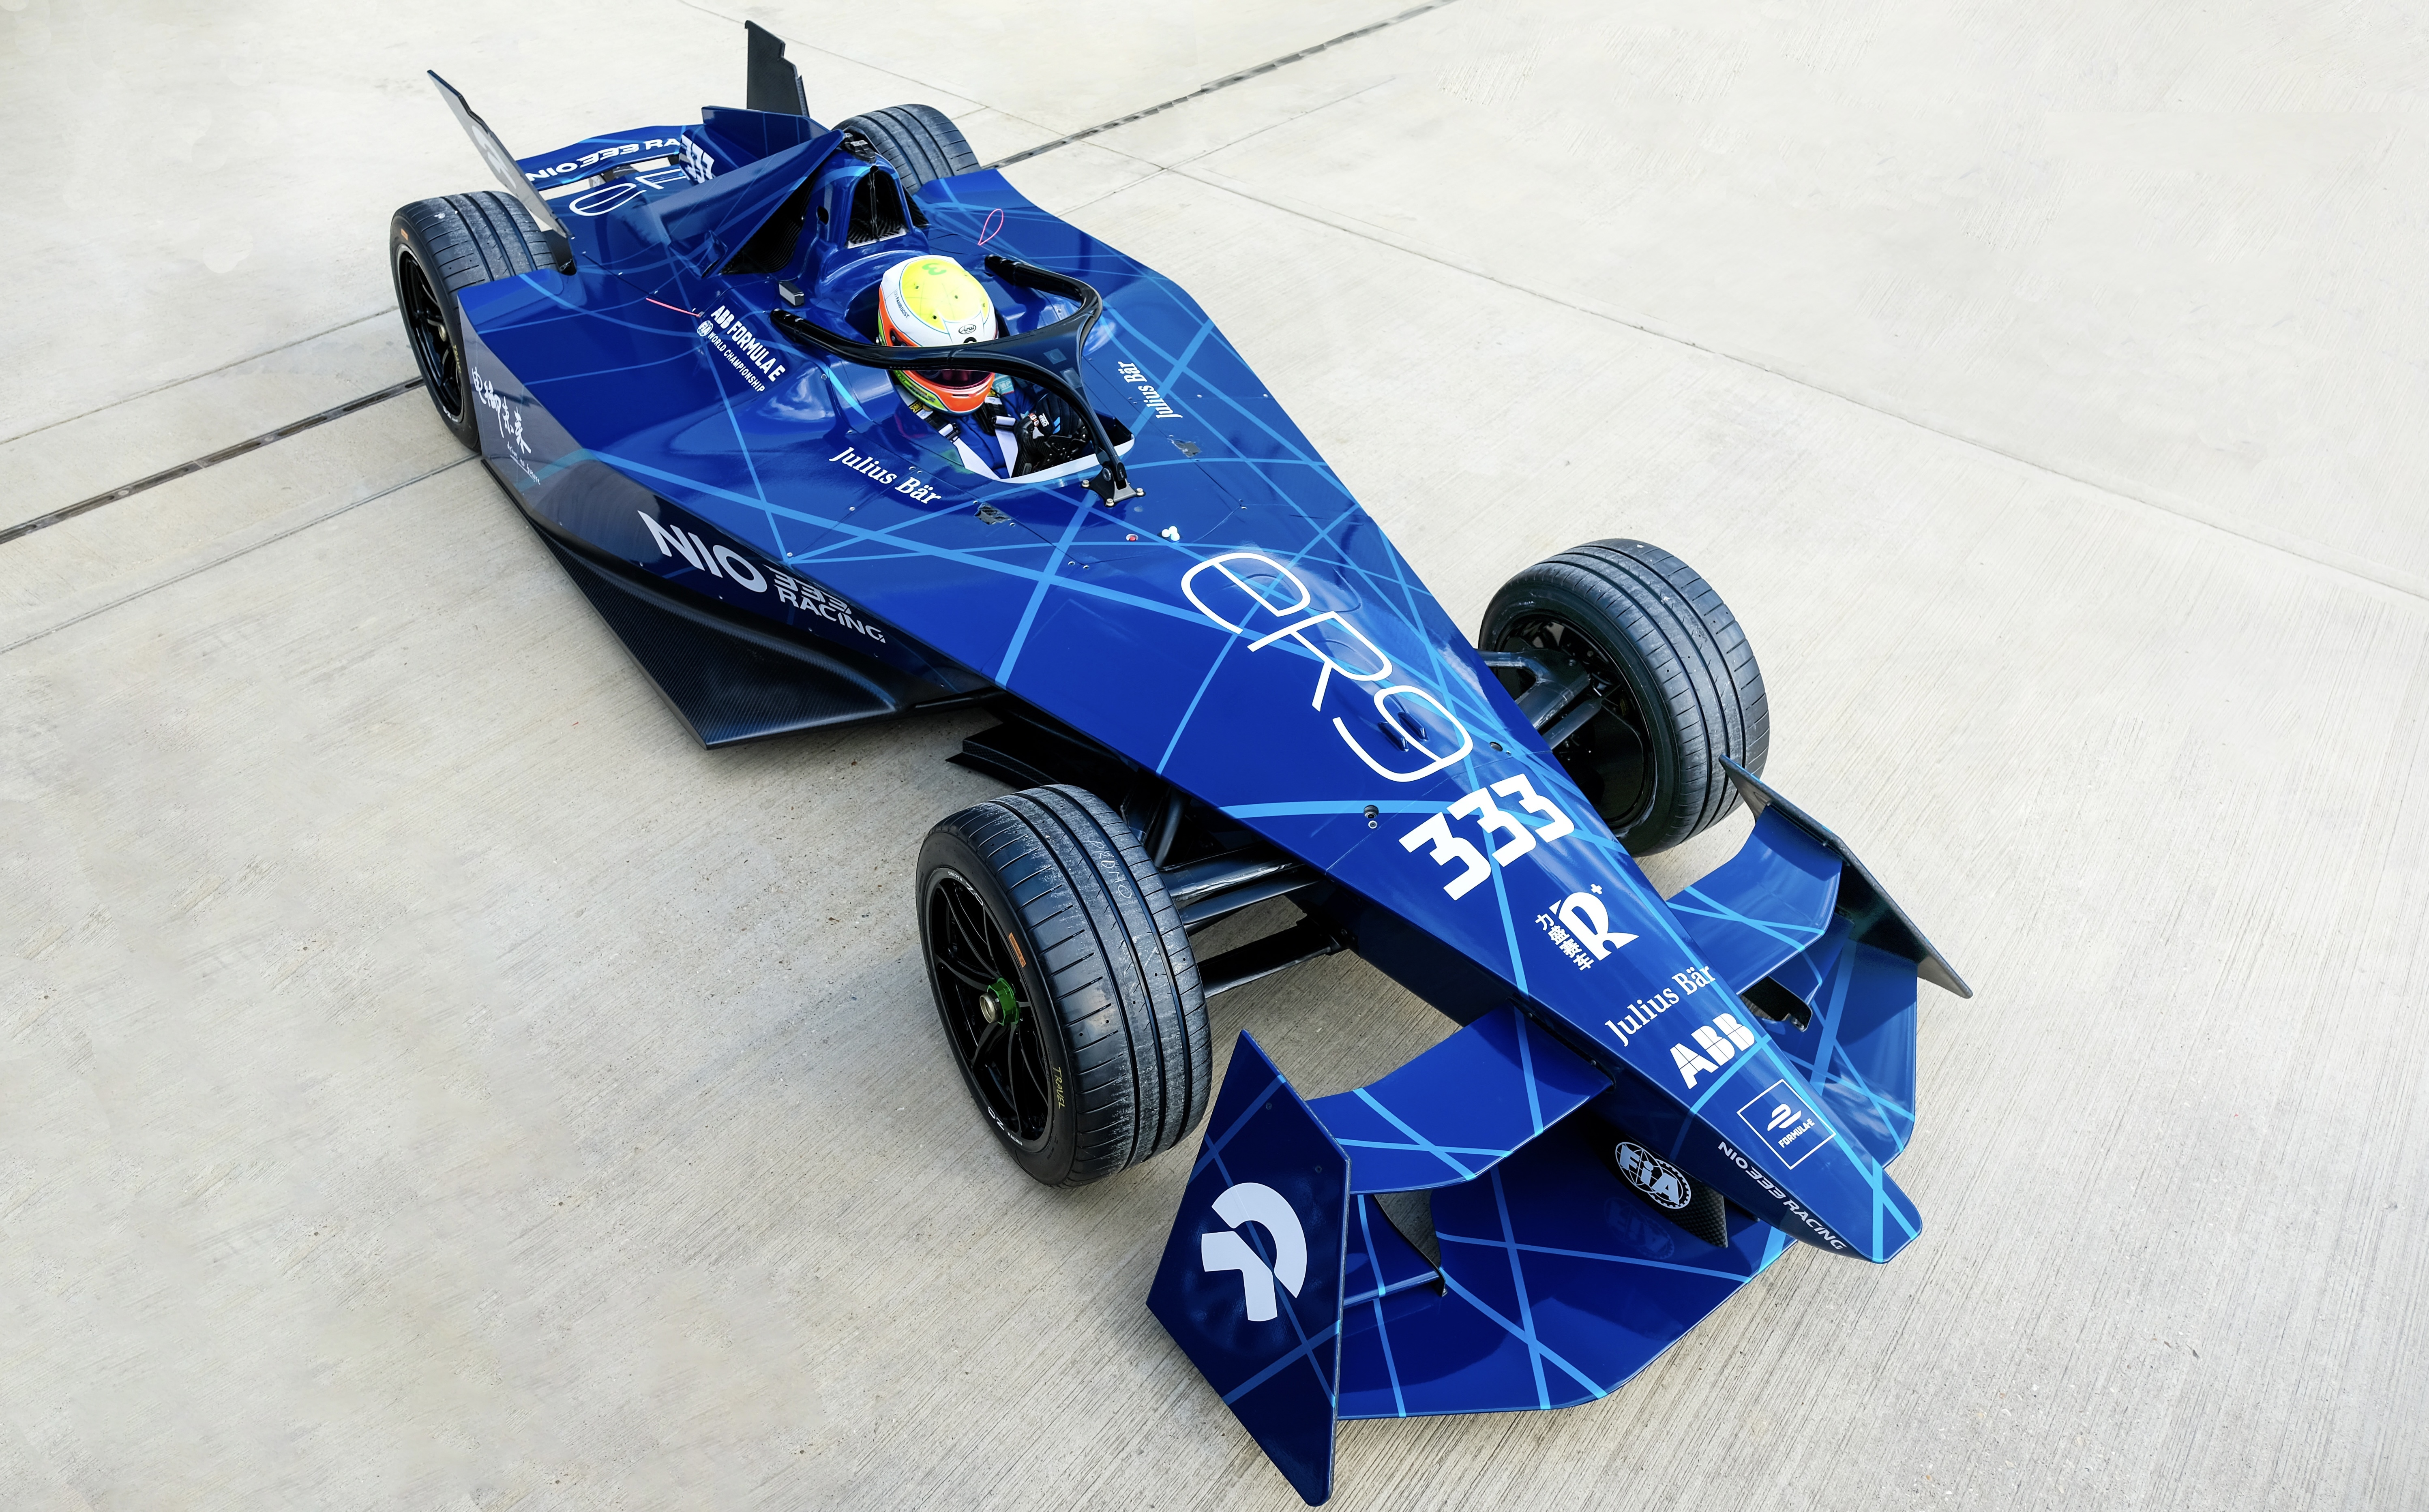 Nio 333 Er9 Gen3 Test Car Oliver Turvey Silverstone Hq 13 June 2022 Full Car With Travel Tyres Image1